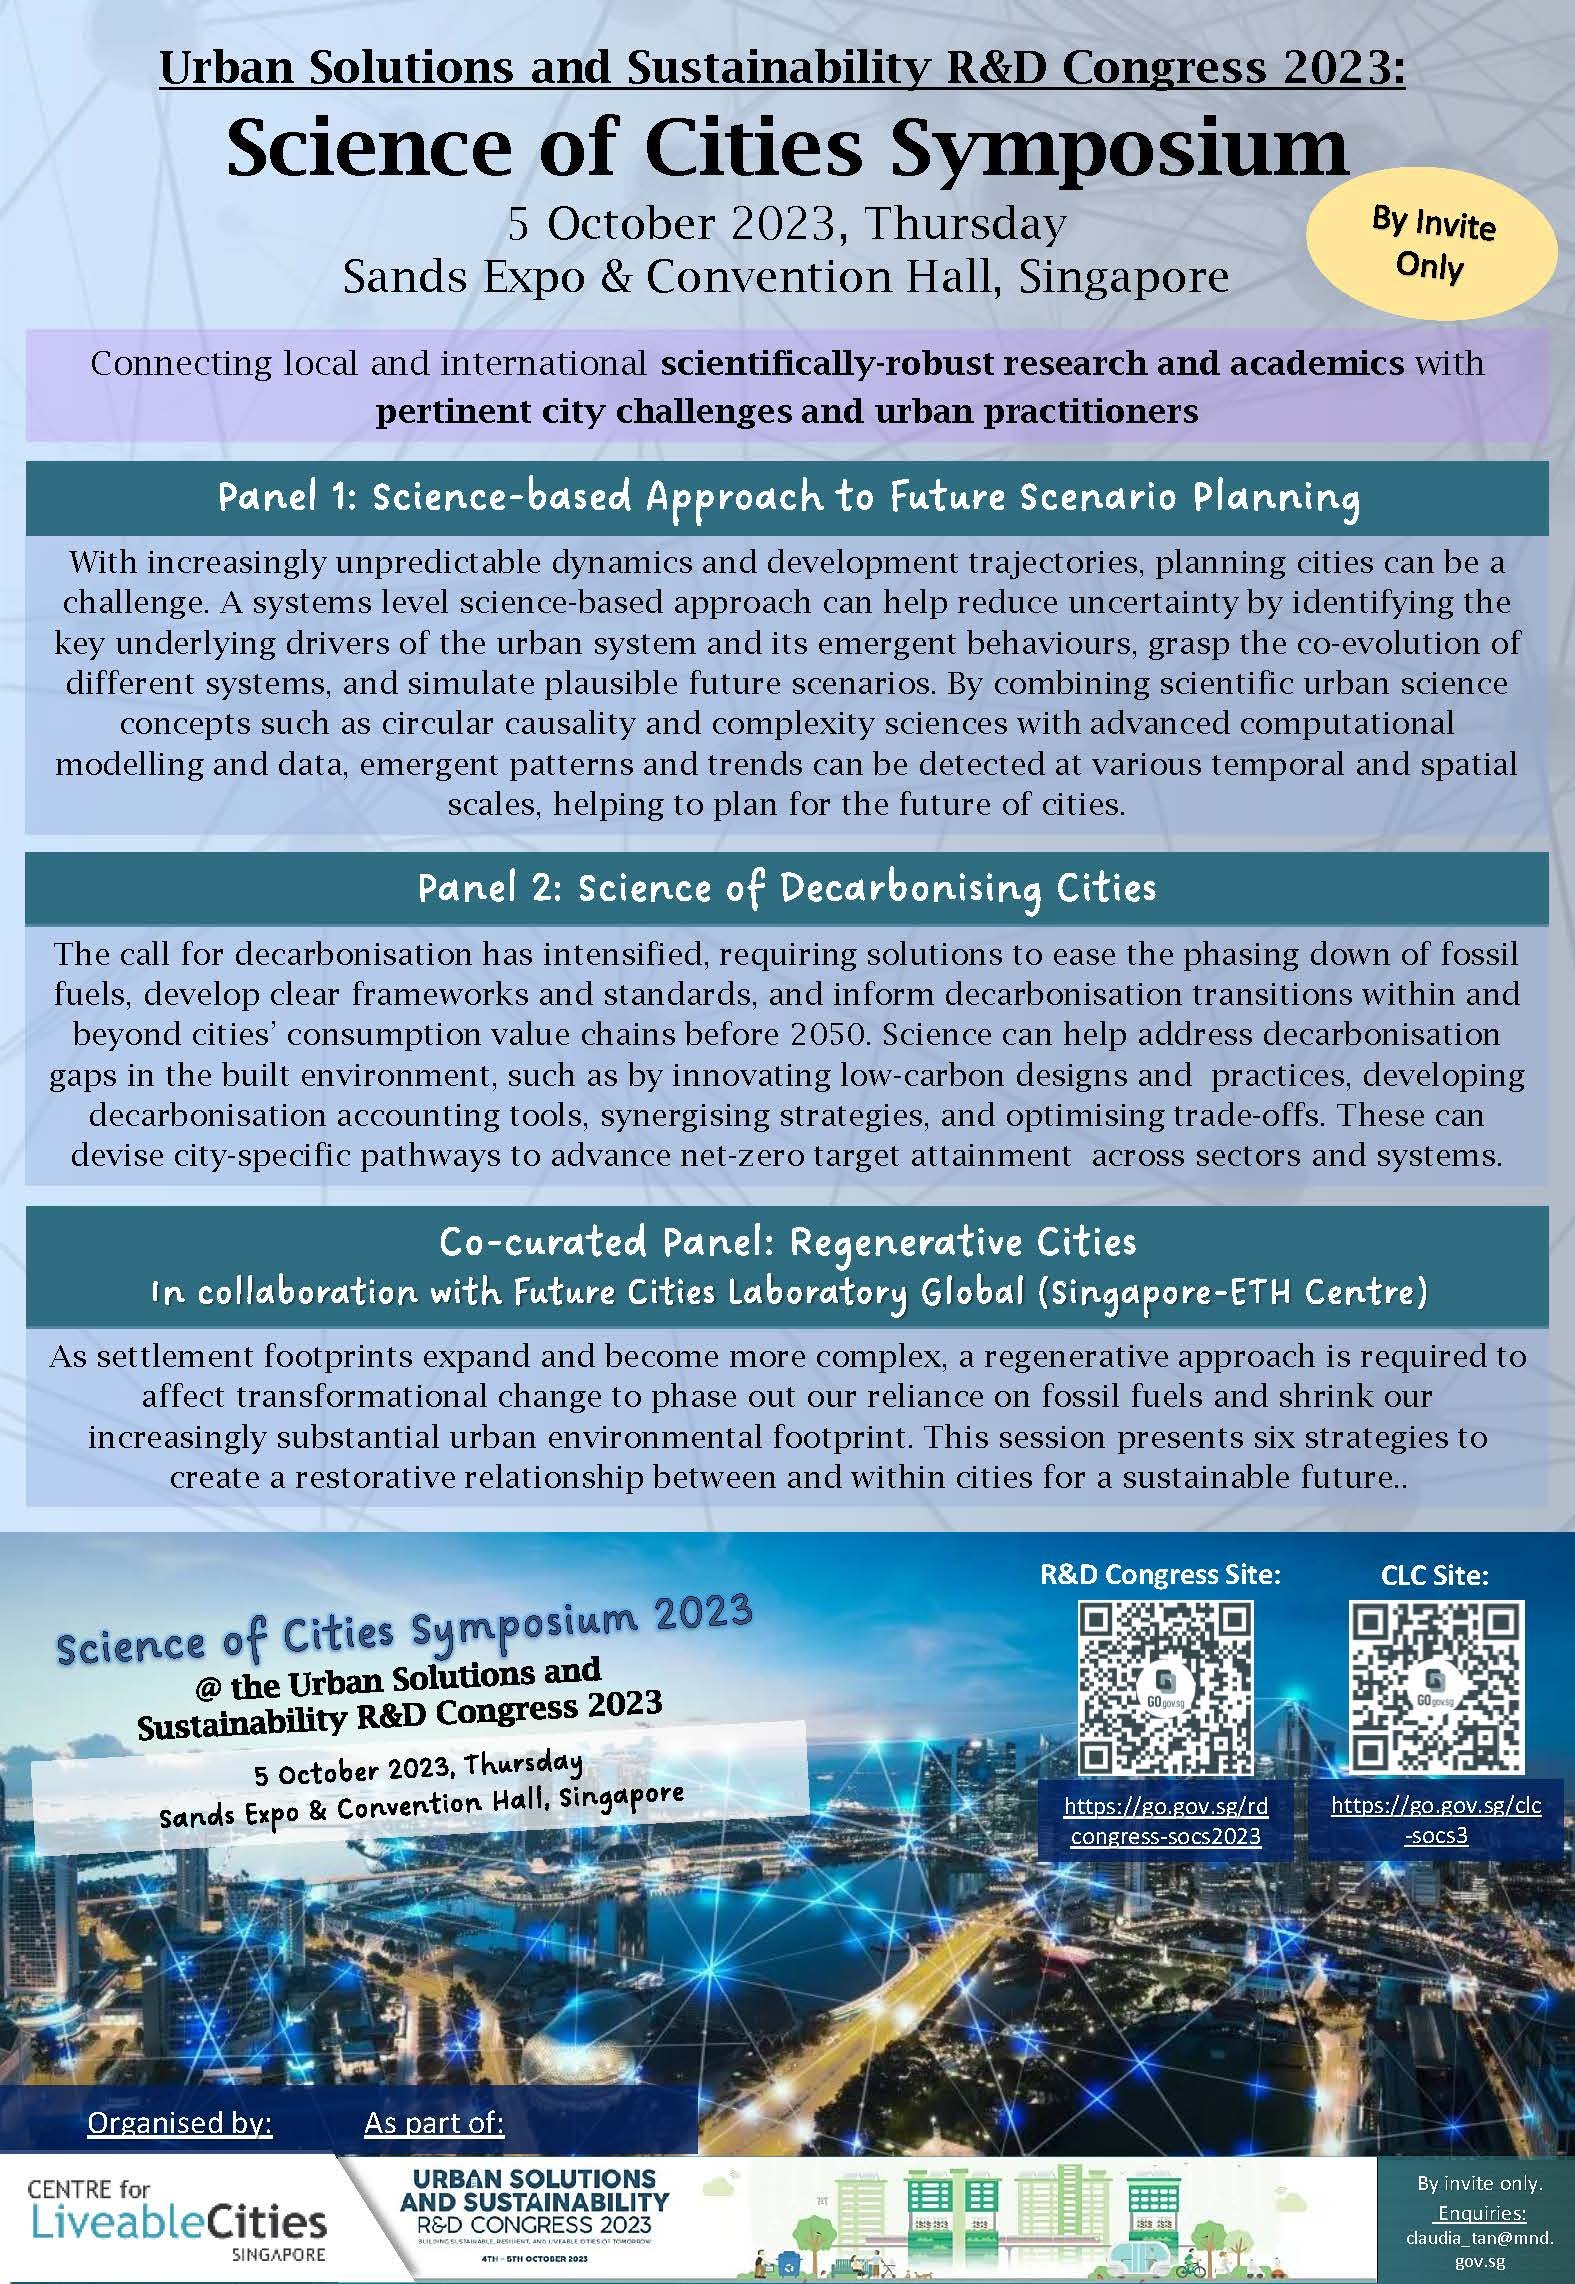 Science of Cities Symposium 2023 Flyer2_Page_1.jpg